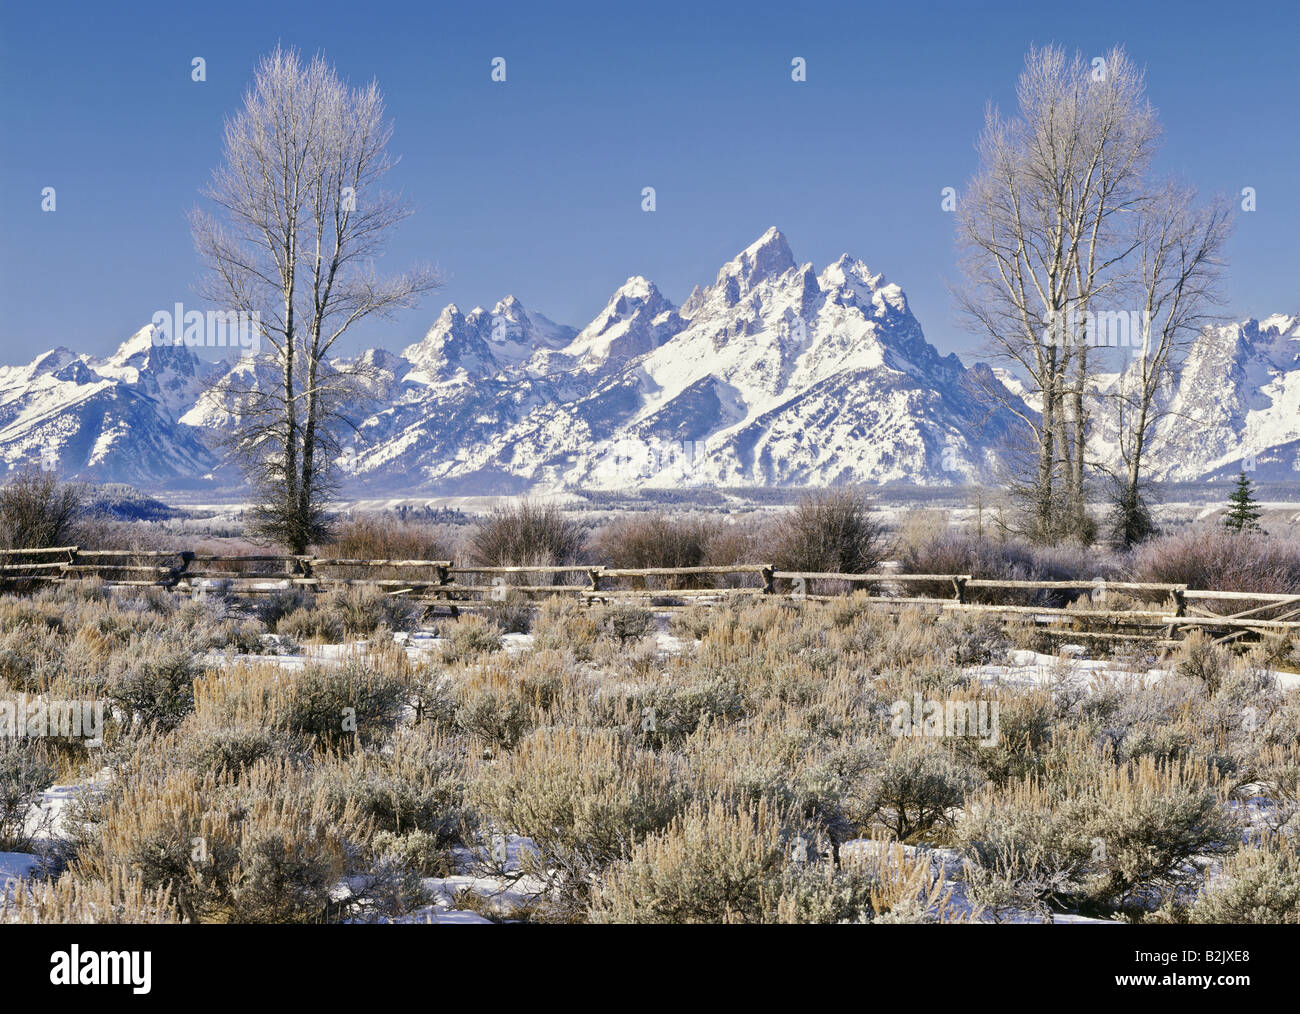 Geographie/Reisen, USA, Wyoming, Landschaften, Grand Teton National Park, Grand Teton Bergkette, Additional-Rights - Clearance-Info - Not-Available Stockfoto